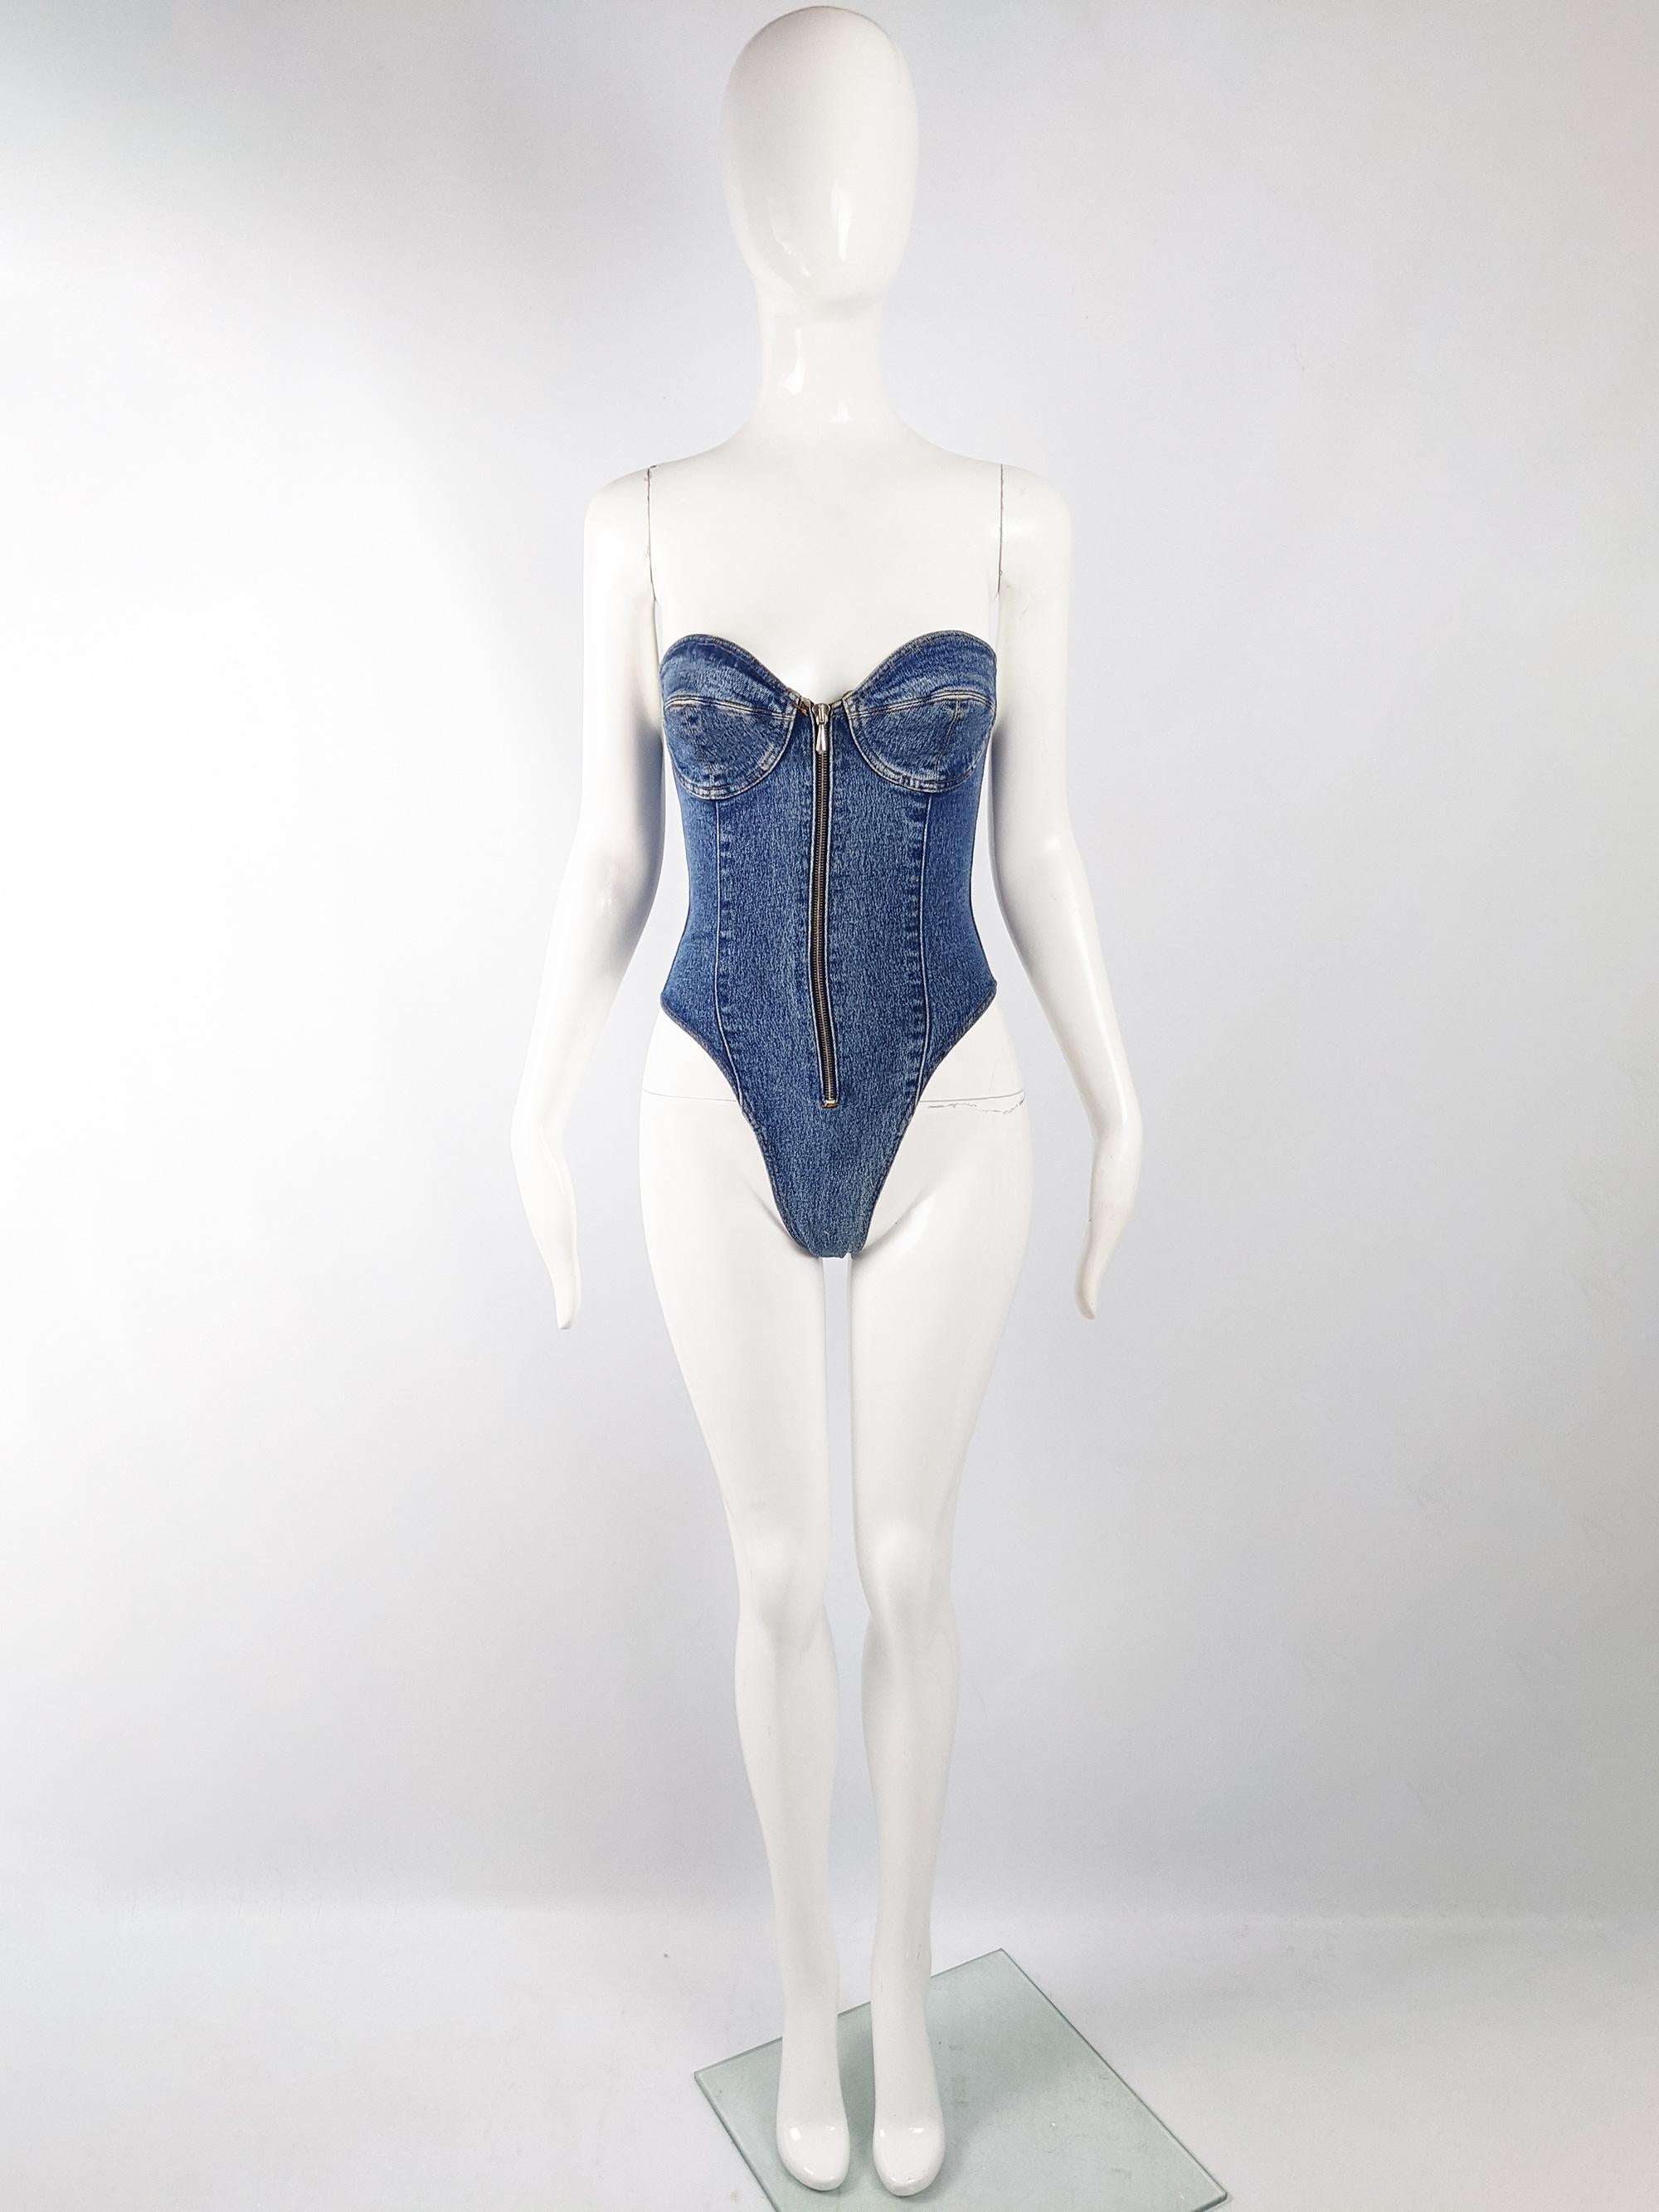 An incredible and rare vintage womens Katharine Hamnett denim leotard / bodysuit from the late 80s / early 90s. In a blue denim with amazing construction, it has a panelled back that gives a flattering silhouette and a zip front with a sweetheart